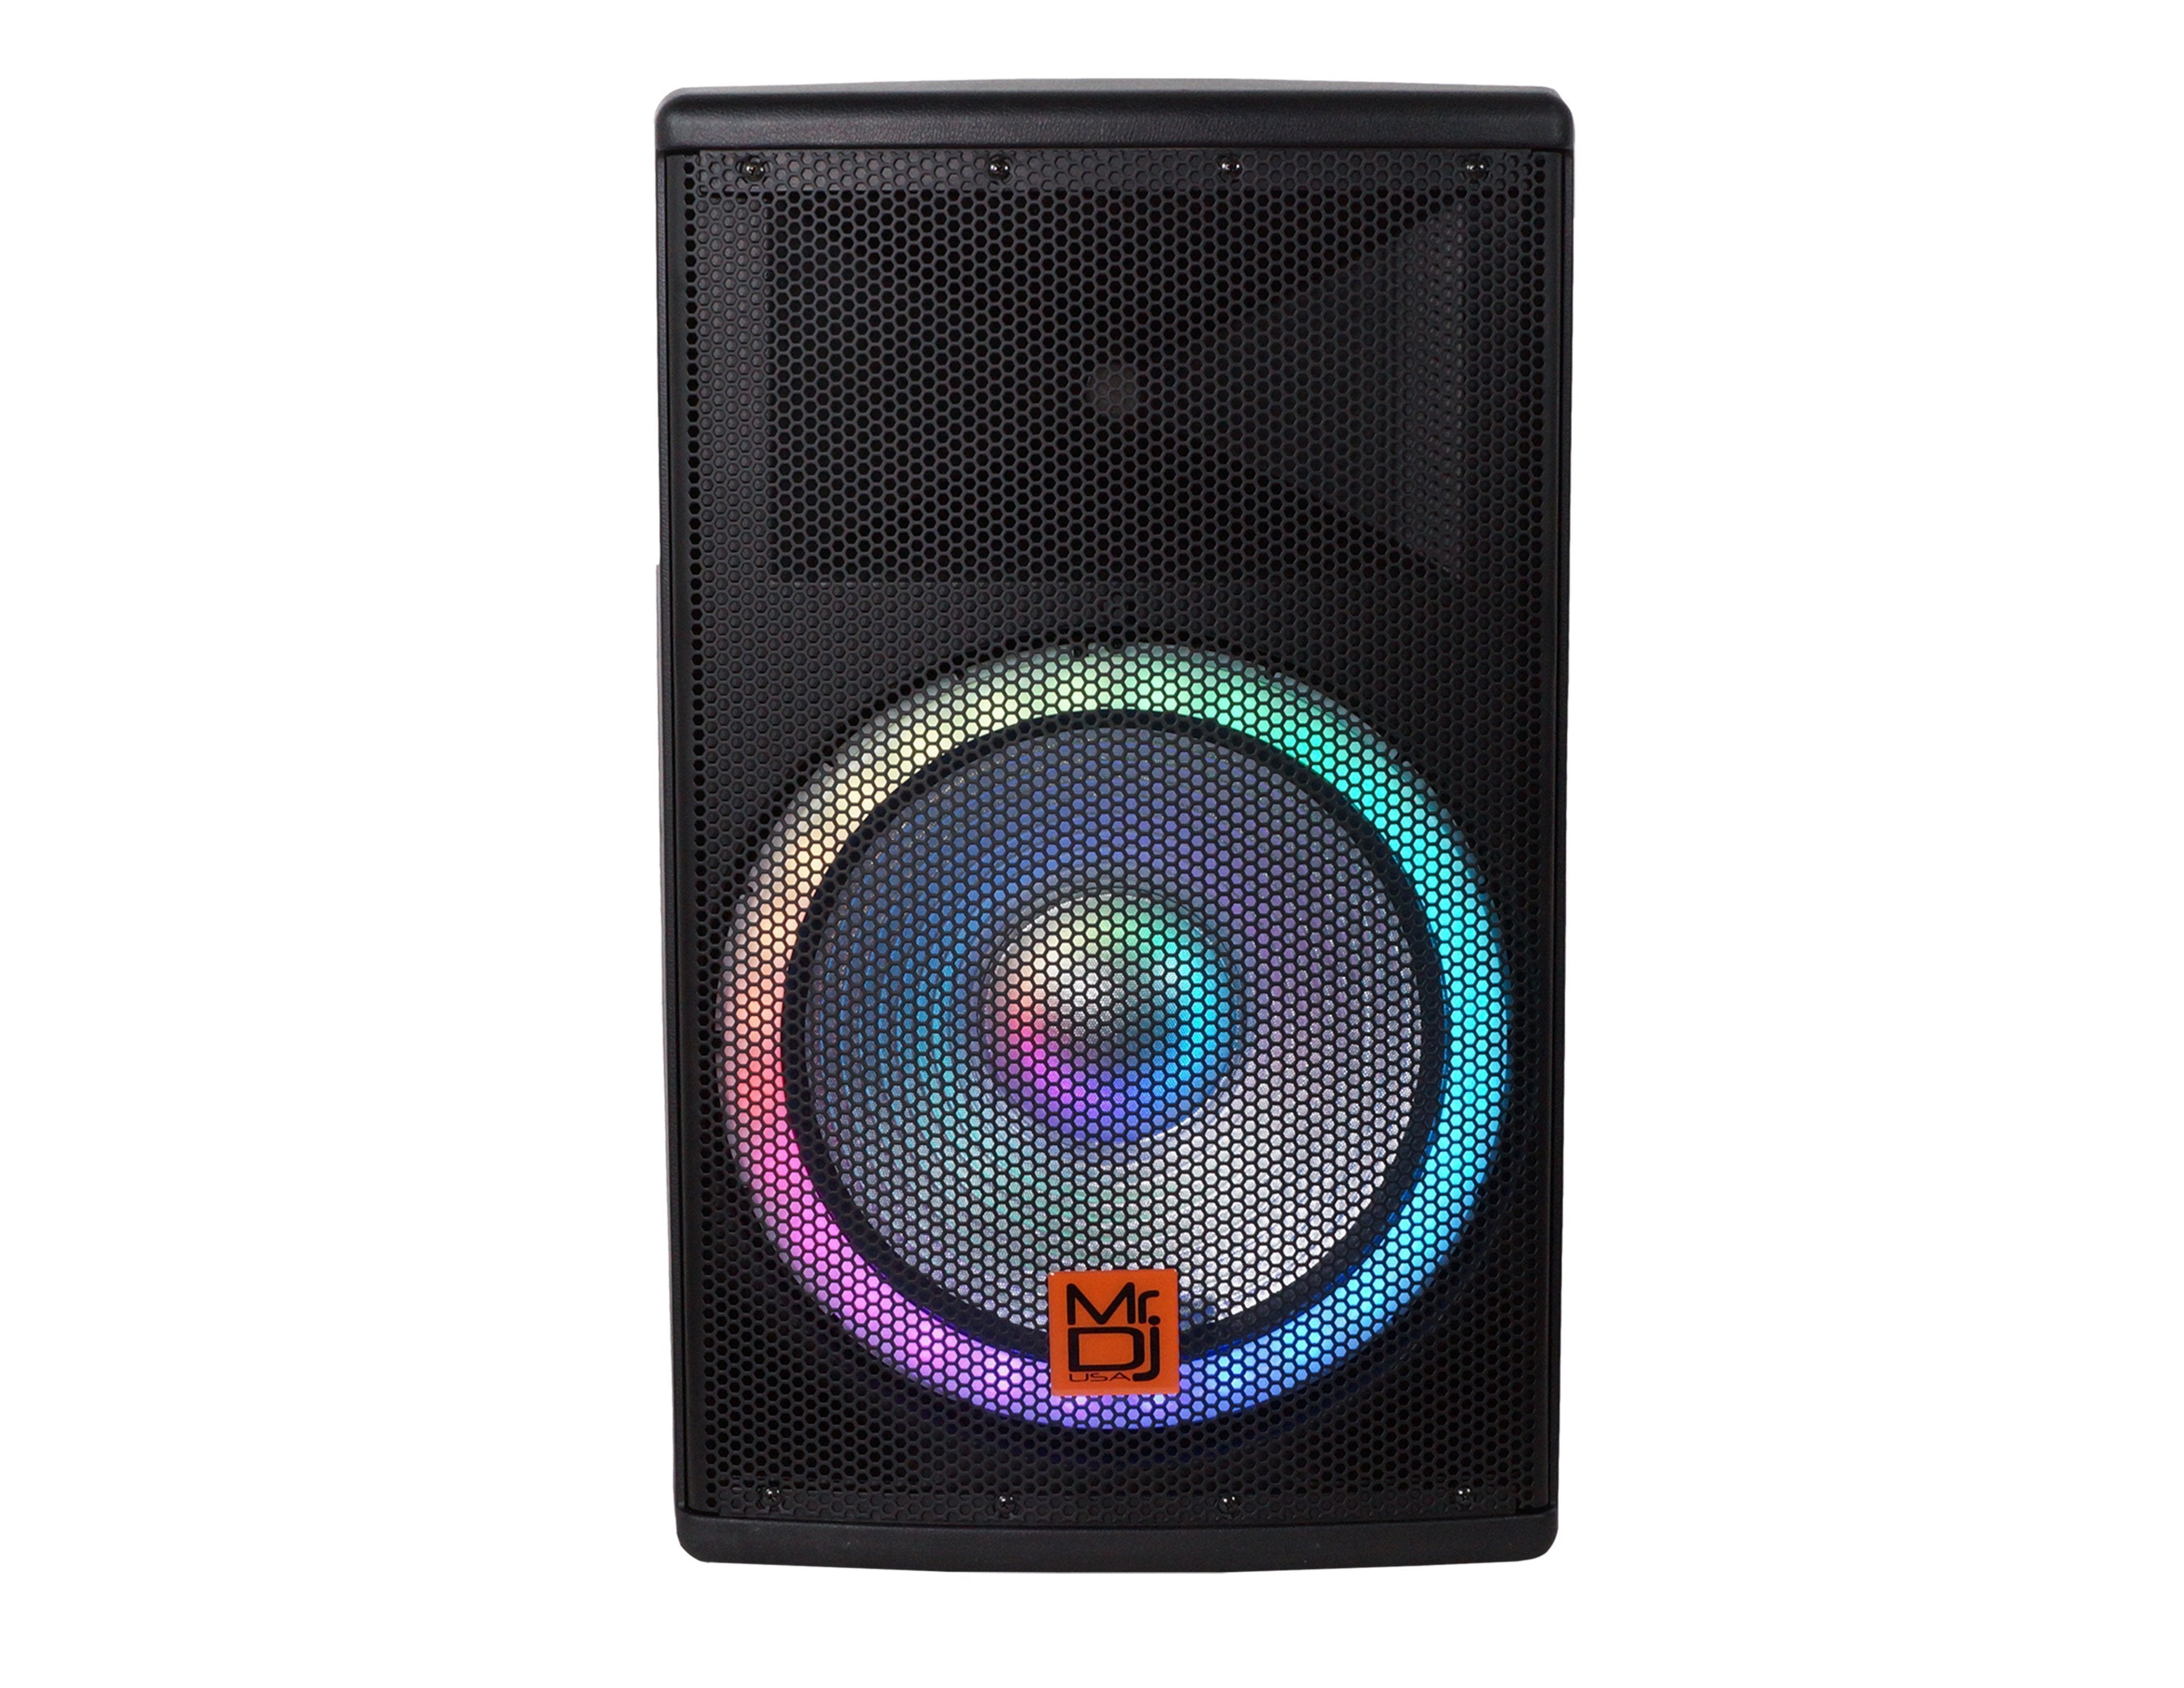 Mr. DJ SYNERGY15 15" Portable Bluetooth PA Speaker System 4500W Bluetooth Speaker Portable PA System with Microphone input, Party Lights, MP3/USB SD Card Reader, Rolling Wheels - image 1 of 2